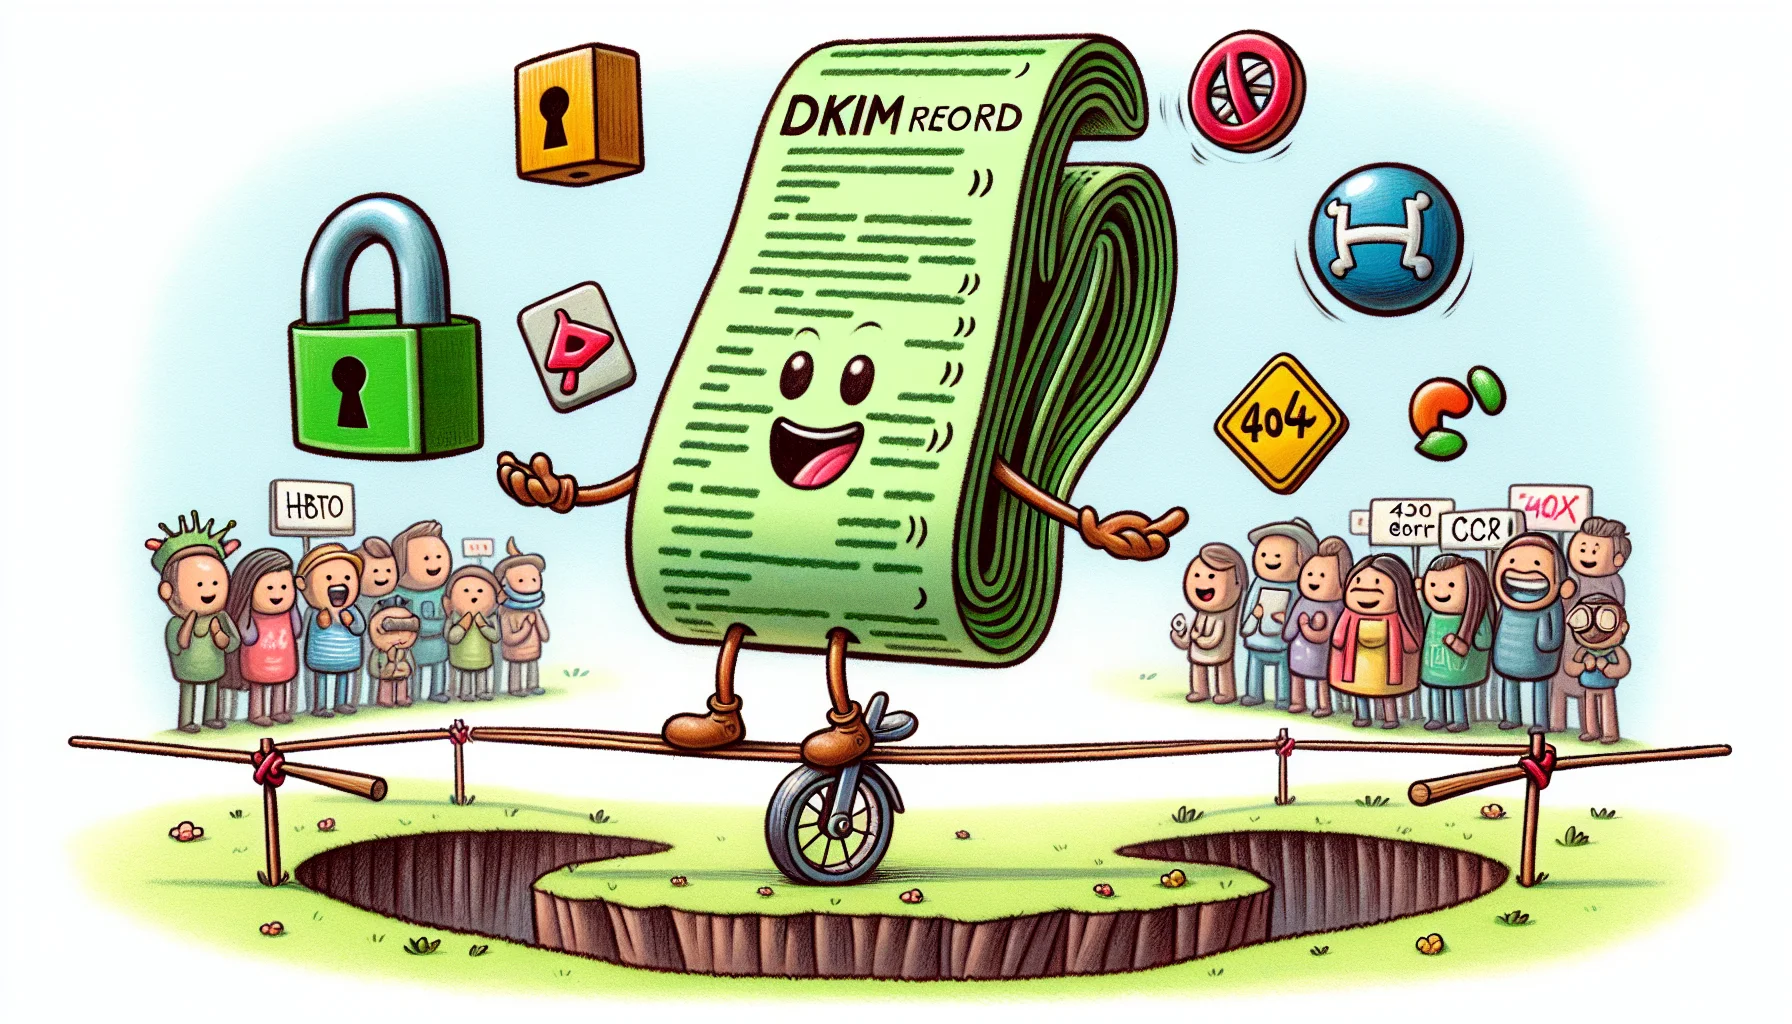 Imagine a humorous scenario related to web hosting. The main star of this setup is a sentient DKIM record, manifested as a lengthy scroll with complex inscriptions, from a website hosting company. The DKIM record is portrayed as a whimsical character with a cheeky smile, balancing an oversized green lock, symbolizing security, on its head. It is juggling symbols for various web technologies, such as HTML, CSS, and JavaScript emblems, while riding a unicycle on a tightrope above a pit of '404 error' chasms. The kicker is a crowd of charming, cartoonish web developers watching with amusement and cheering on the performance.